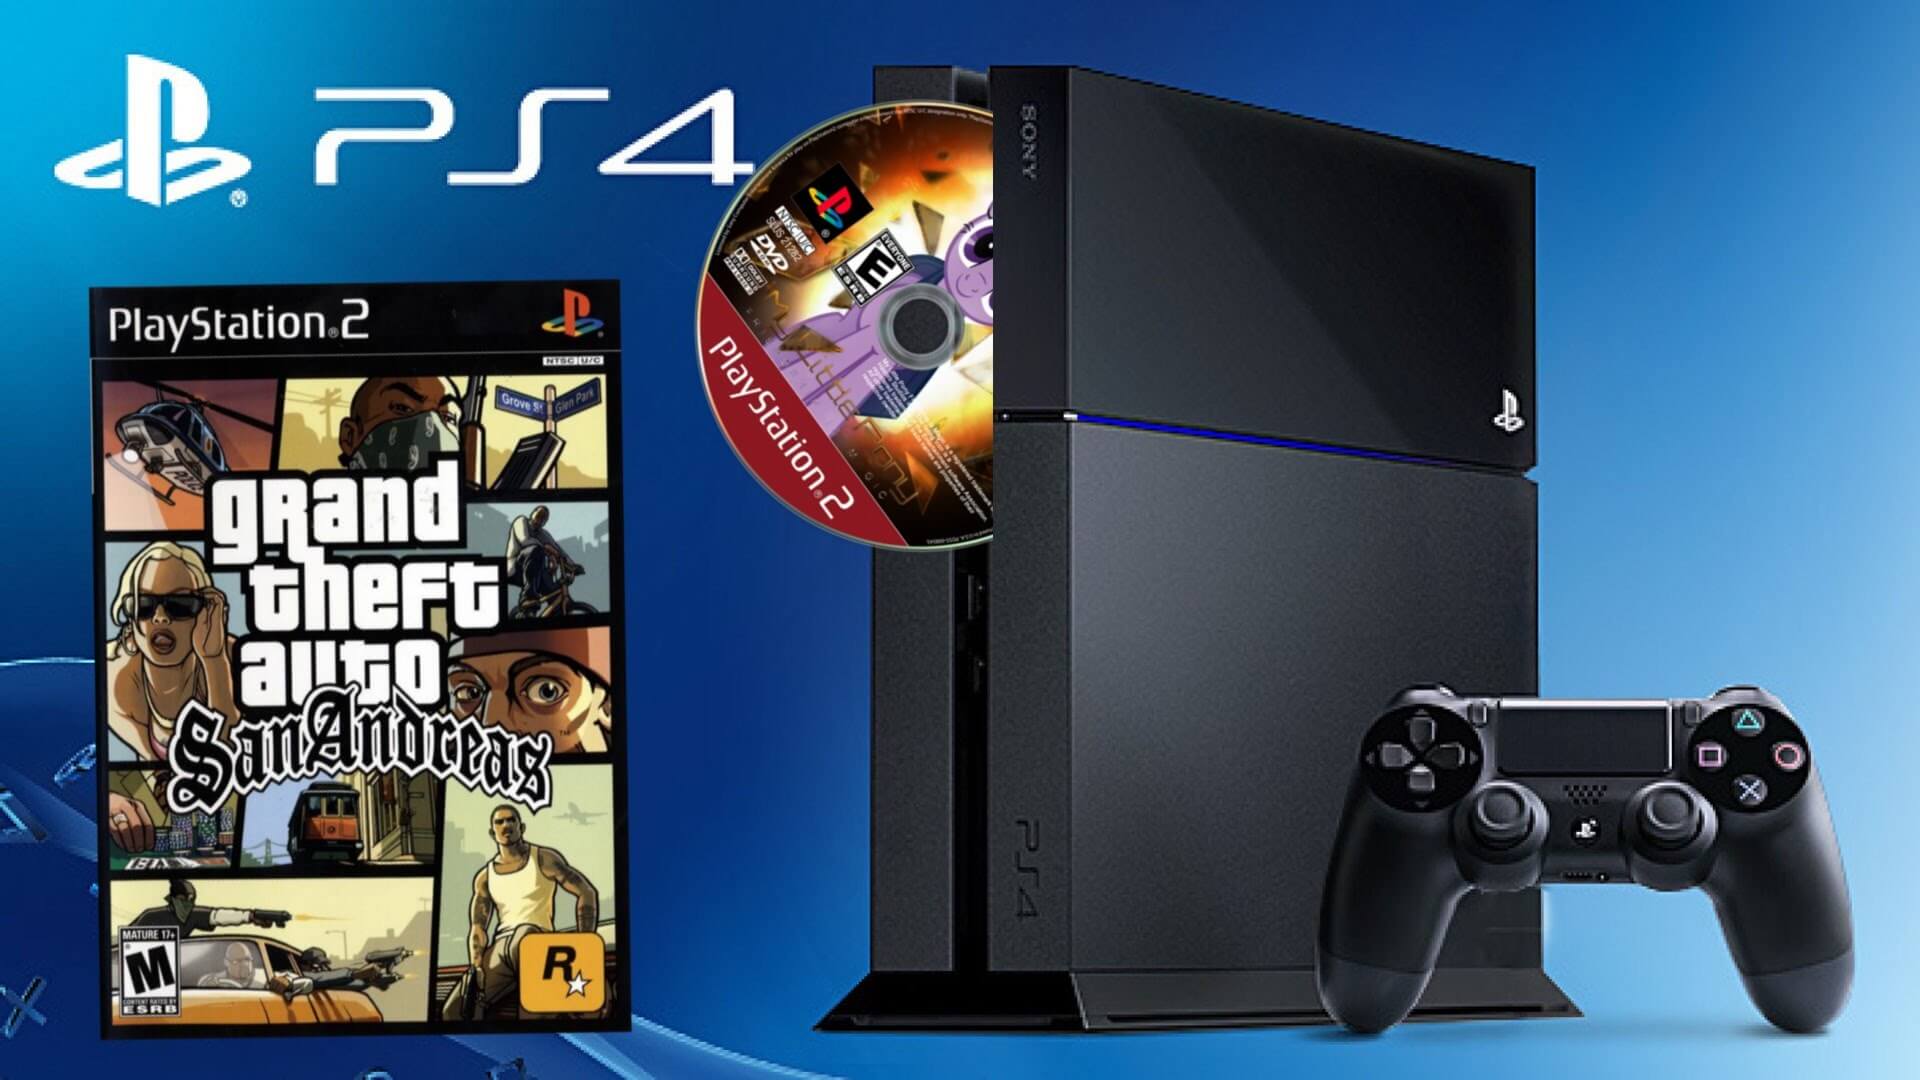 Ps2 ps4. Sony PLAYSTATION 4 игры. Sony PLAYSTATION 4 диски. Диск плейстейшен 4 PS 5. PS ps2 ps3 ps4 PS 5.